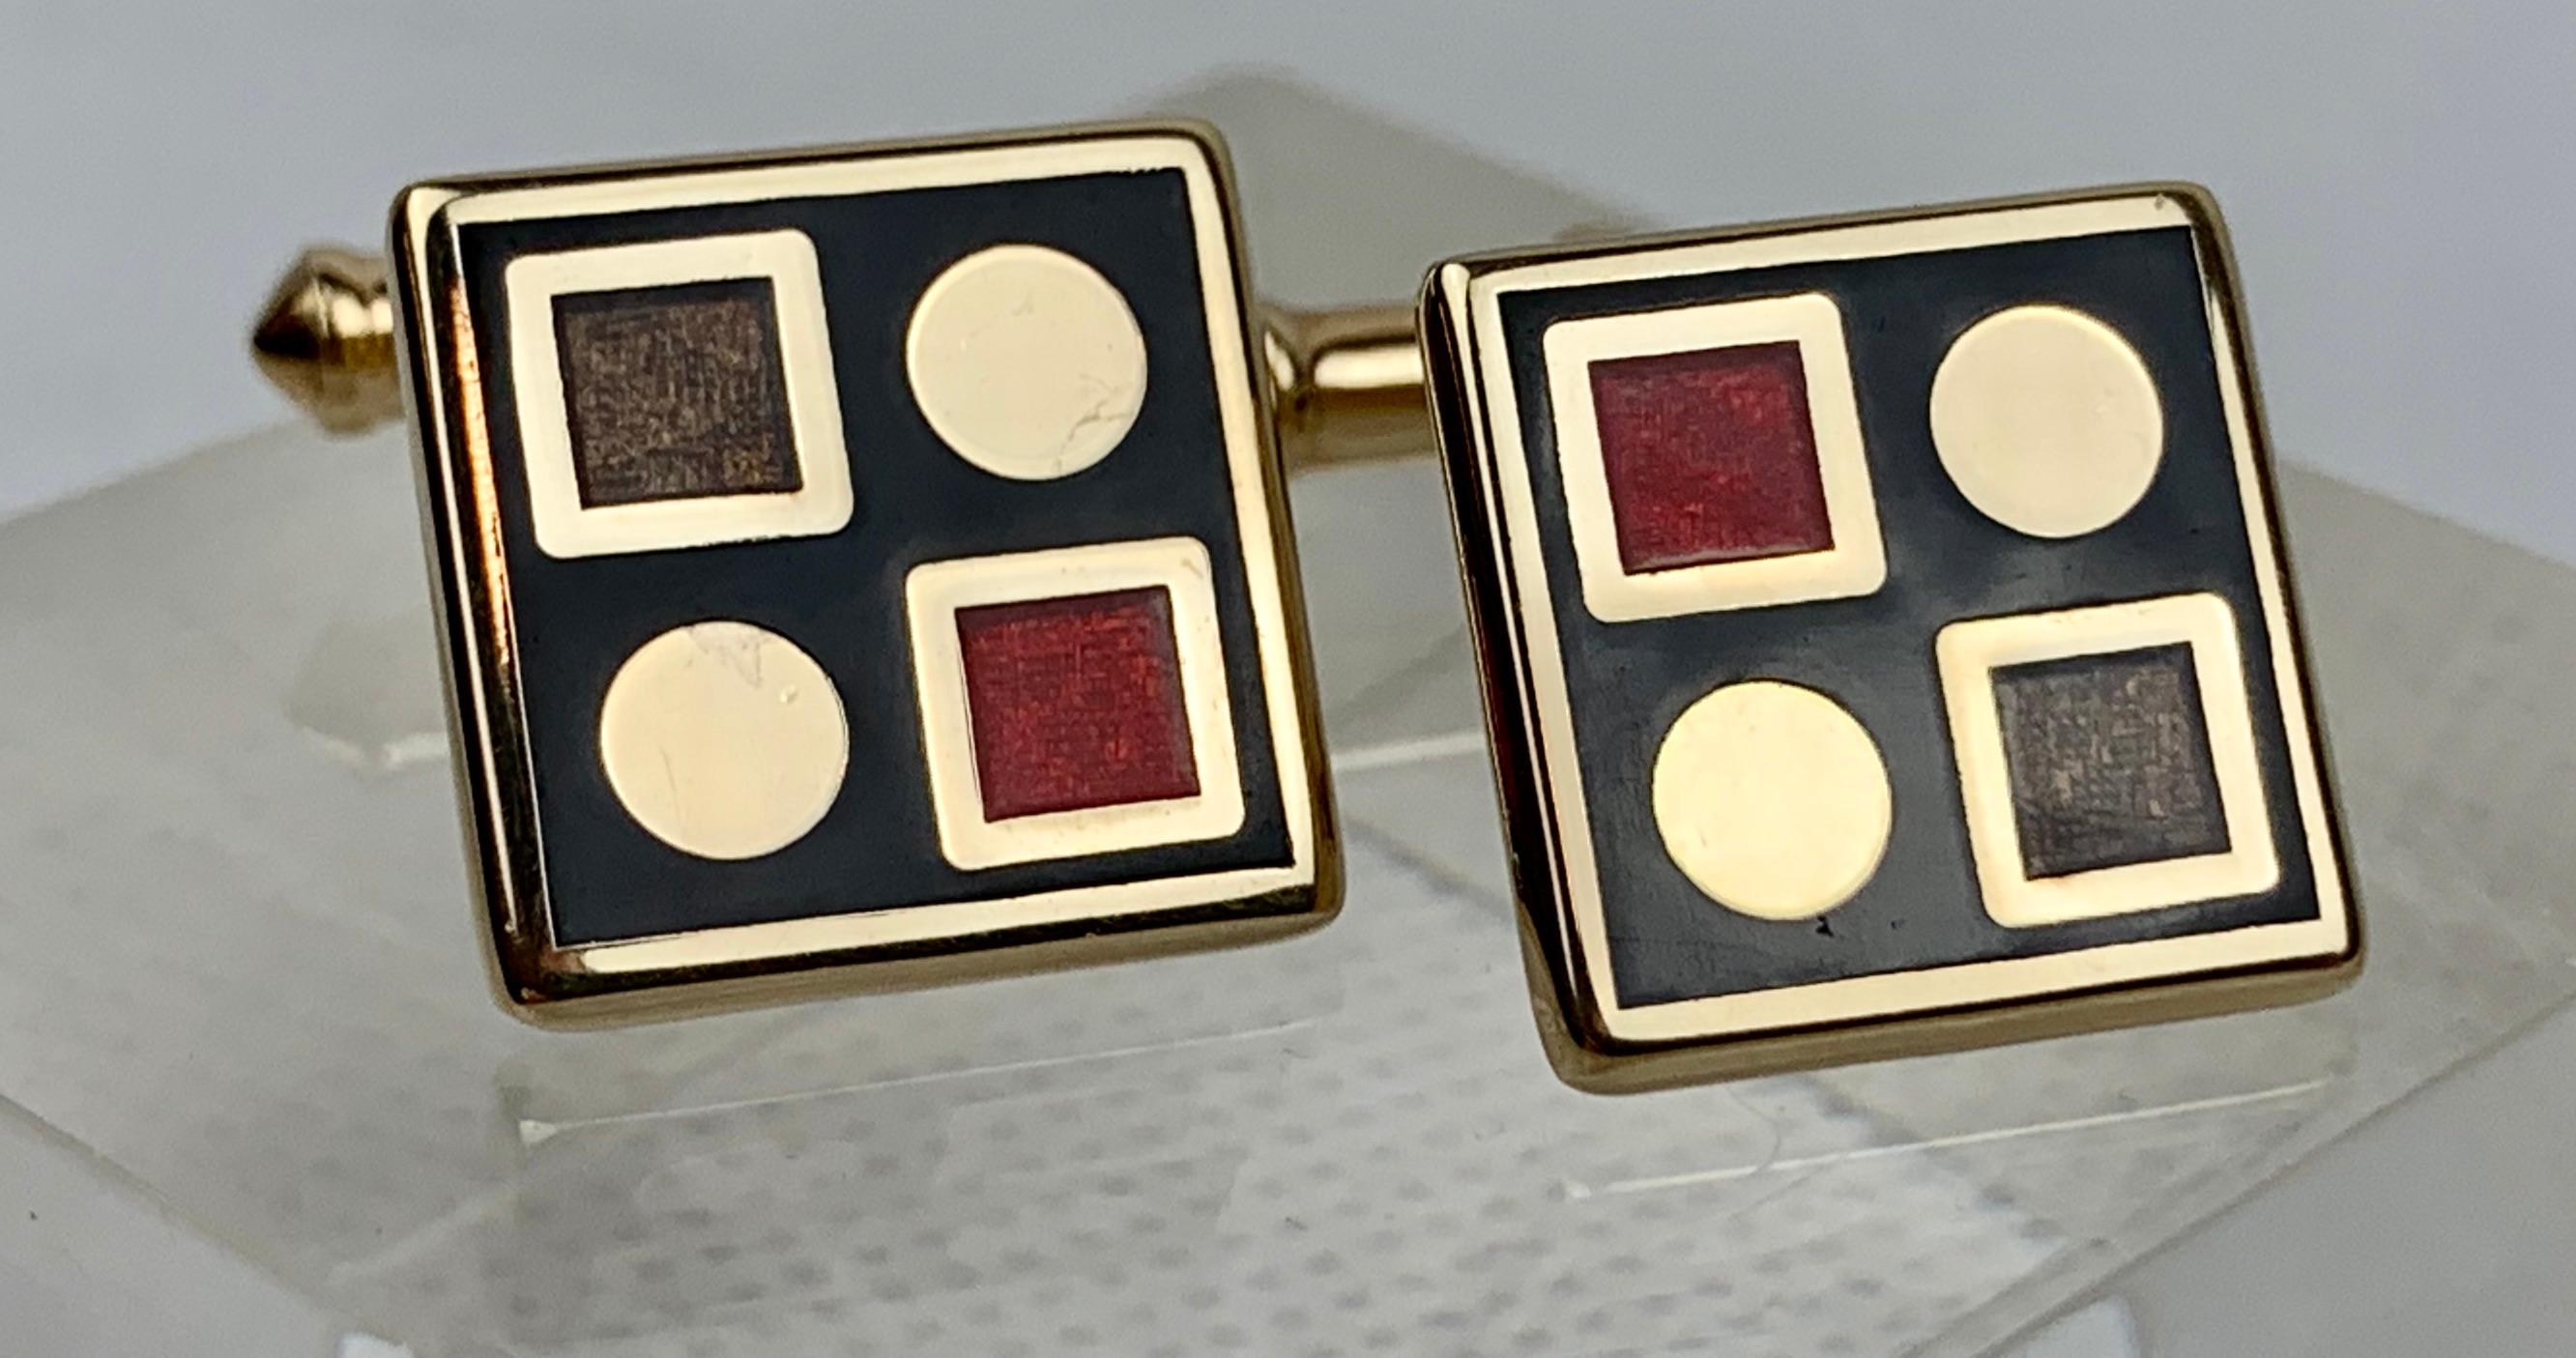 Vintage Geometric Design Cufflinks with Engine Turning and Red/Black Enamel 3